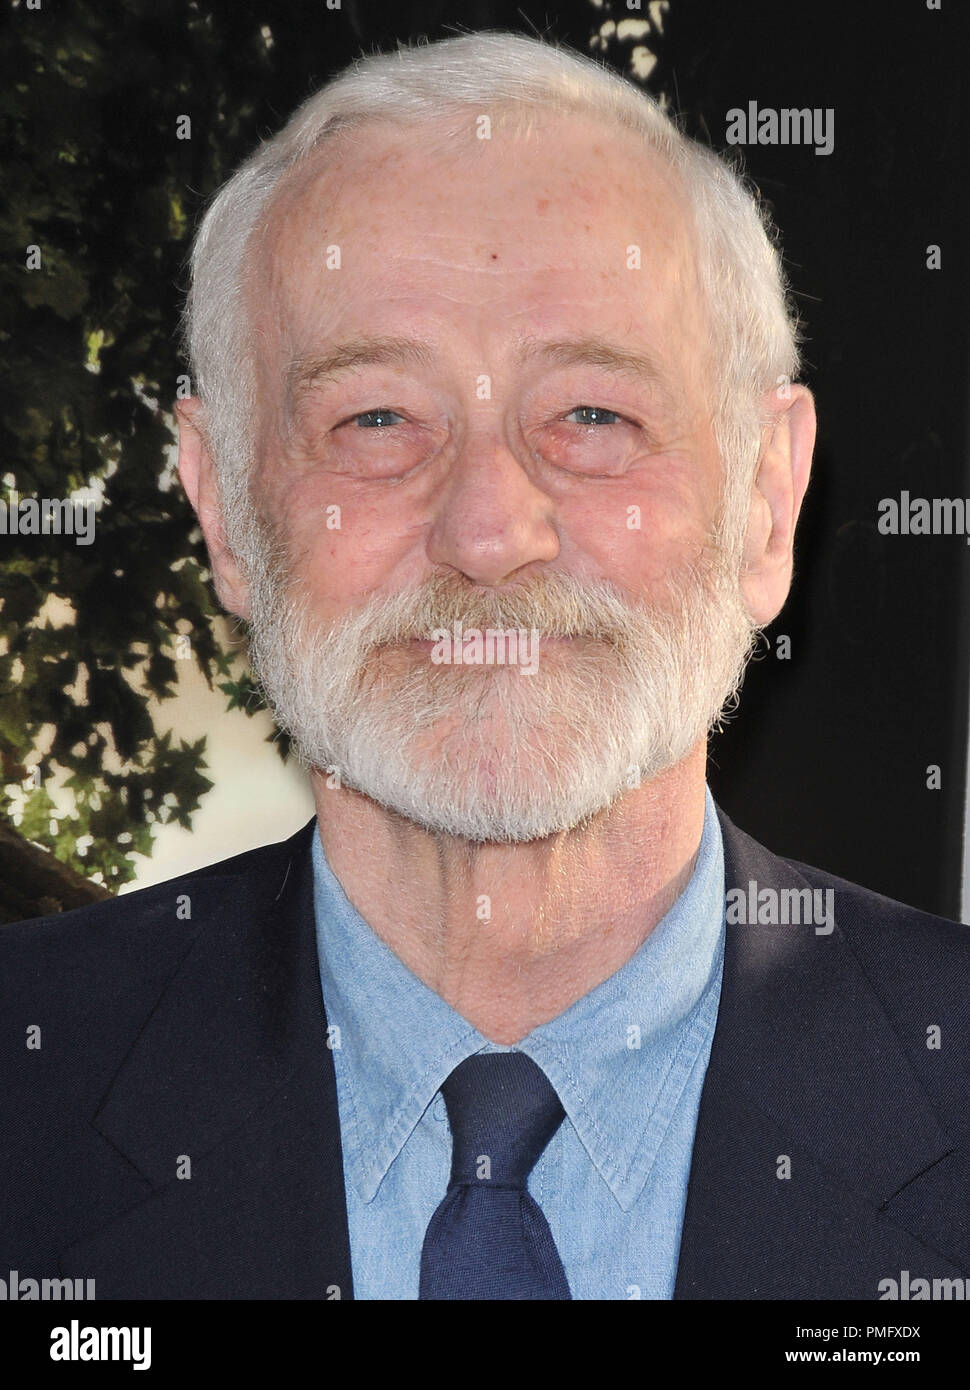 John Mahoney at the Los Angeles Premiere of 'Flipped' held at the ArcLight Cinemas Cinerama Dome in Hollywood, CA. The event took place on Monday, July 26, 2010. Photo by PRPP Pacific Rim Photo Press. File Reference # 30357 037PLX   For Editorial Use Only -  All Rights Reserved Stock Photo